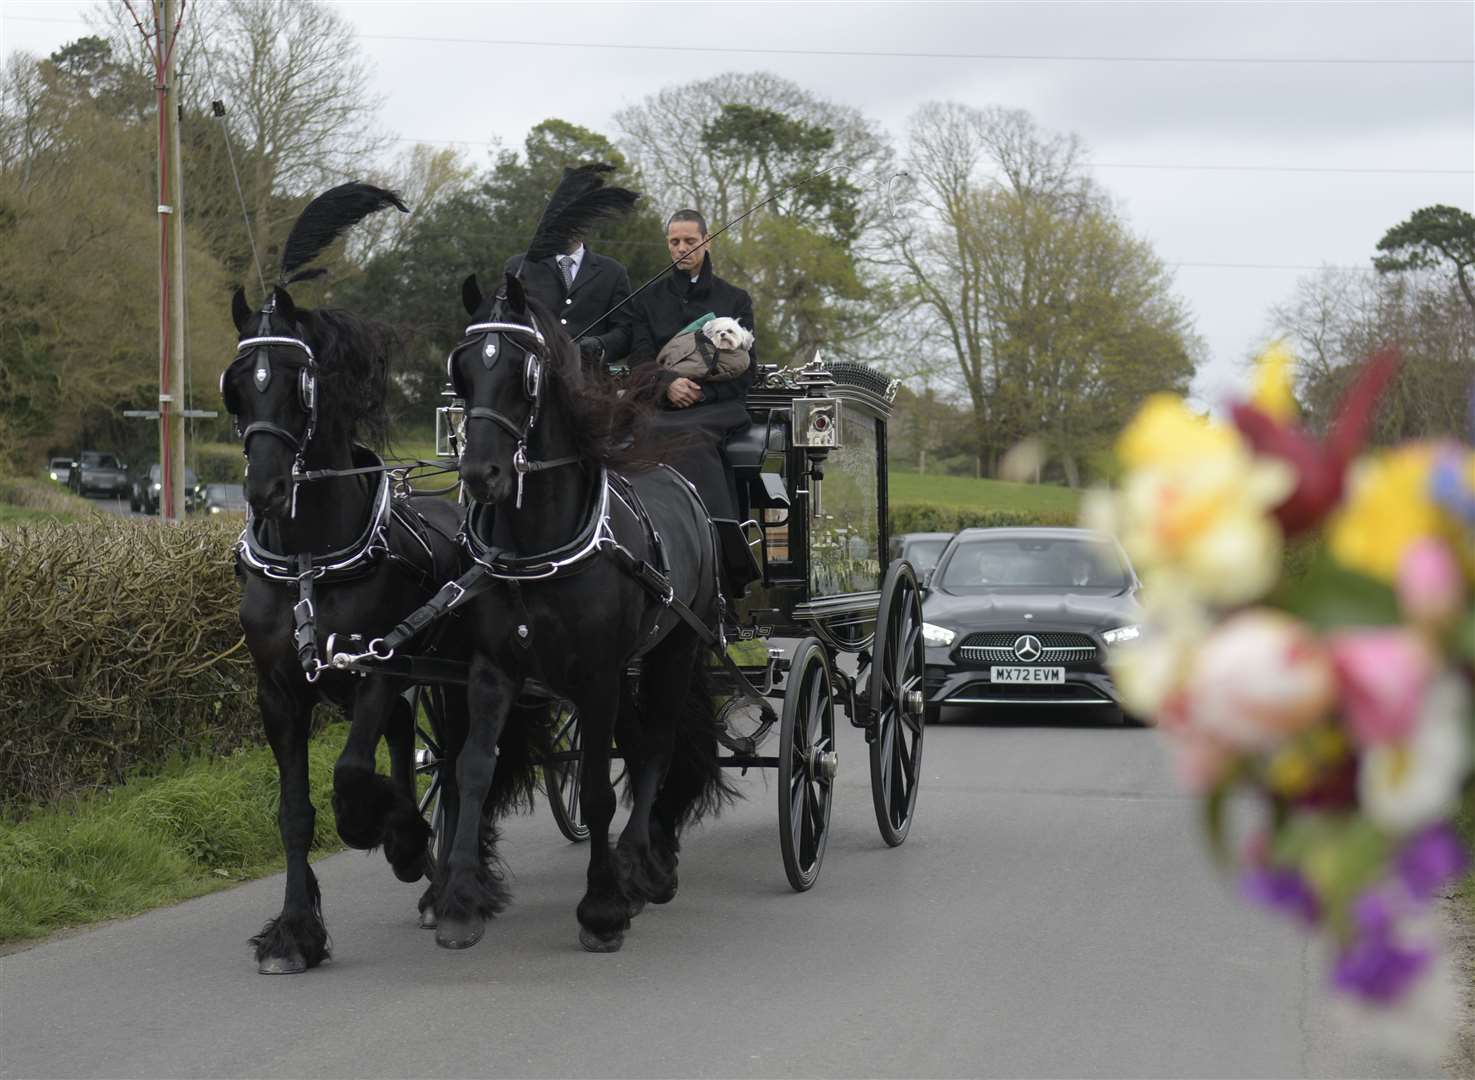 A horse-drawn carriage was taken through Aldington for O’Grady’s funeral in April. Picture: Barry Goodwin